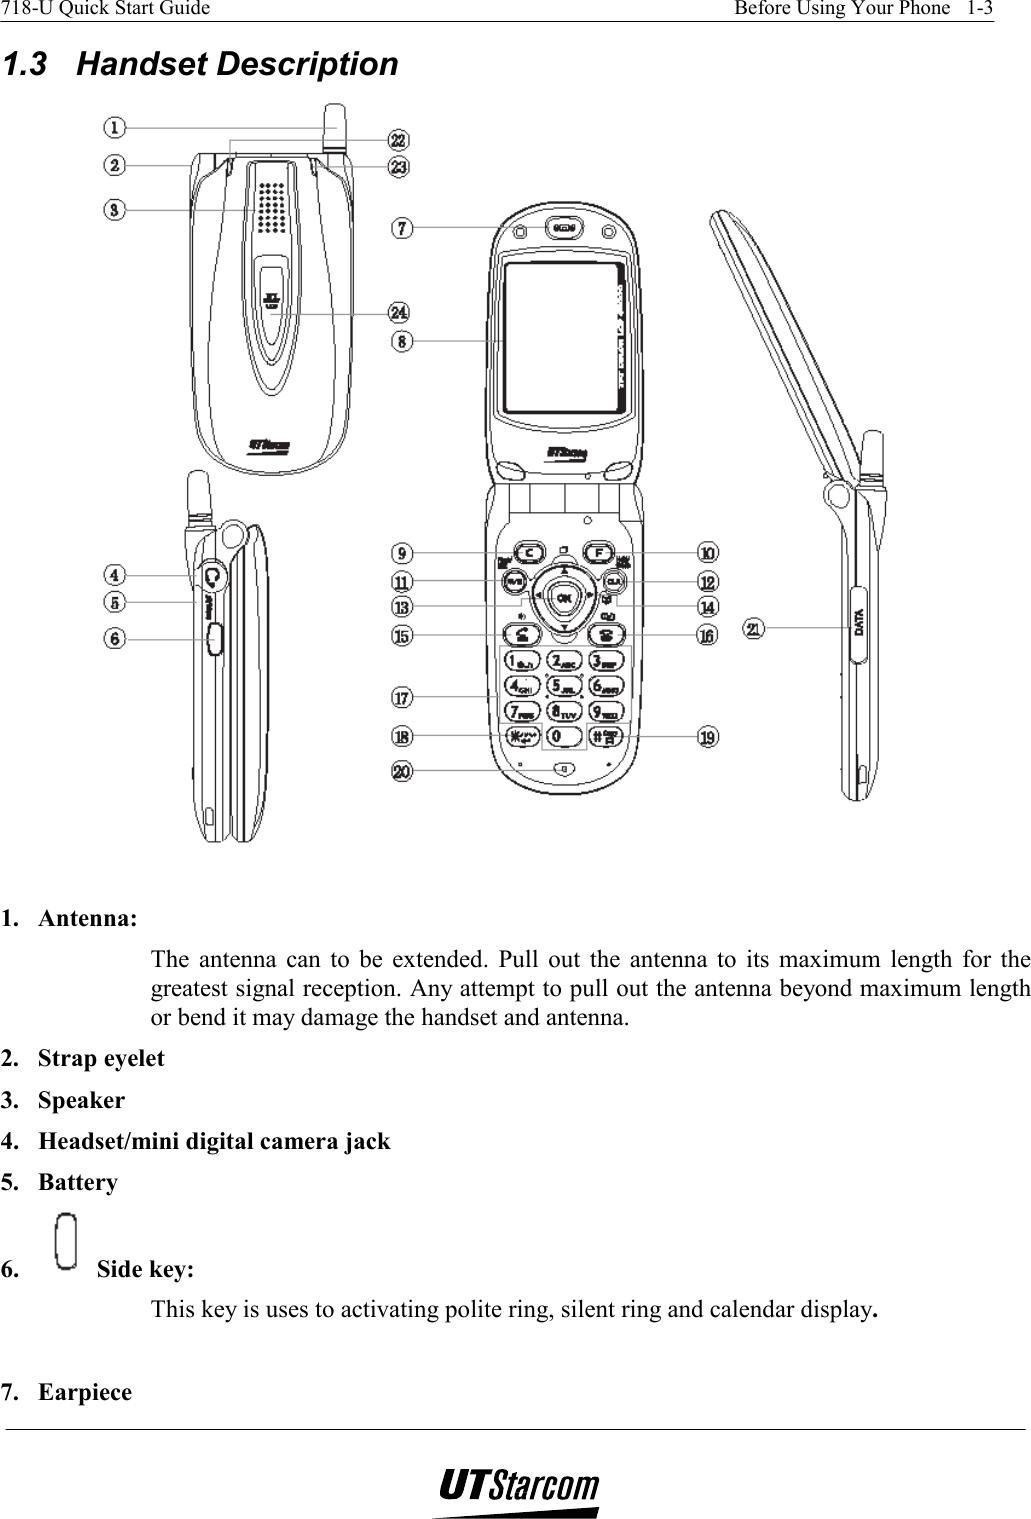 718-U Quick Start Guide    Before Using Your Phone   1-3   1.3 Handset Description   1. Antenna: The antenna can to be extended. Pull out the antenna to its maximum length for the greatest signal reception. Any attempt to pull out the antenna beyond maximum length or bend it may damage the handset and antenna. 2.  Strap eyelet  3. Speaker 4.  Headset/mini digital camera jack 5. Battery  6.   Side key:  This key is uses to activating polite ring, silent ring and calendar display.  7. Earpiece 